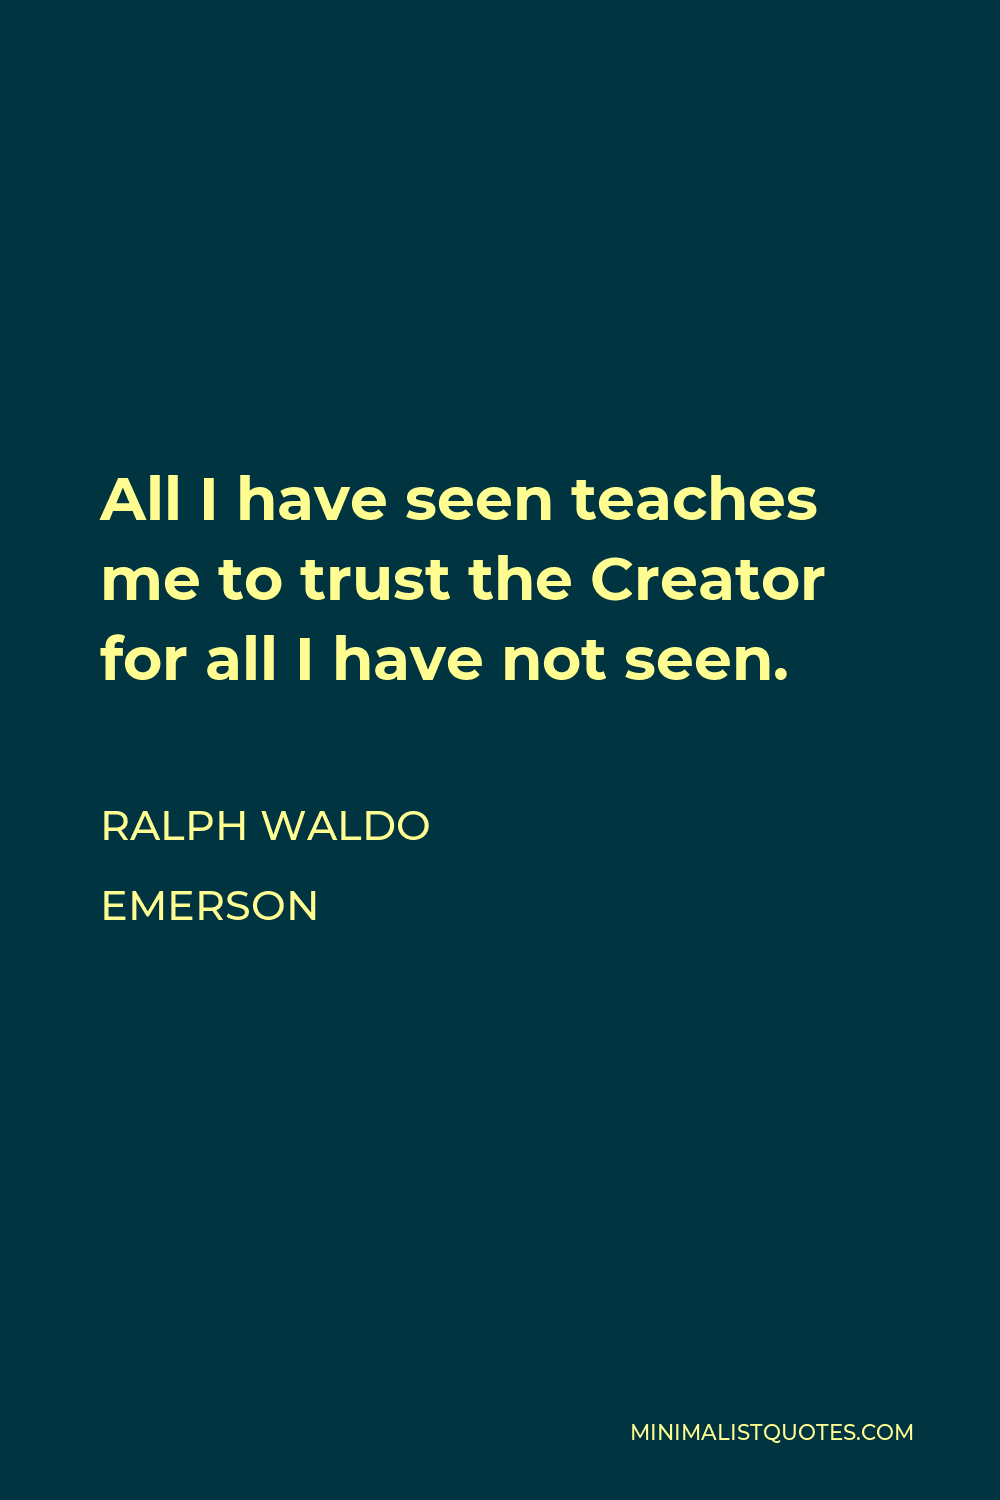 Ralph Waldo Emerson Quote - All I have seen teaches me to trust the Creator for all I have not seen.